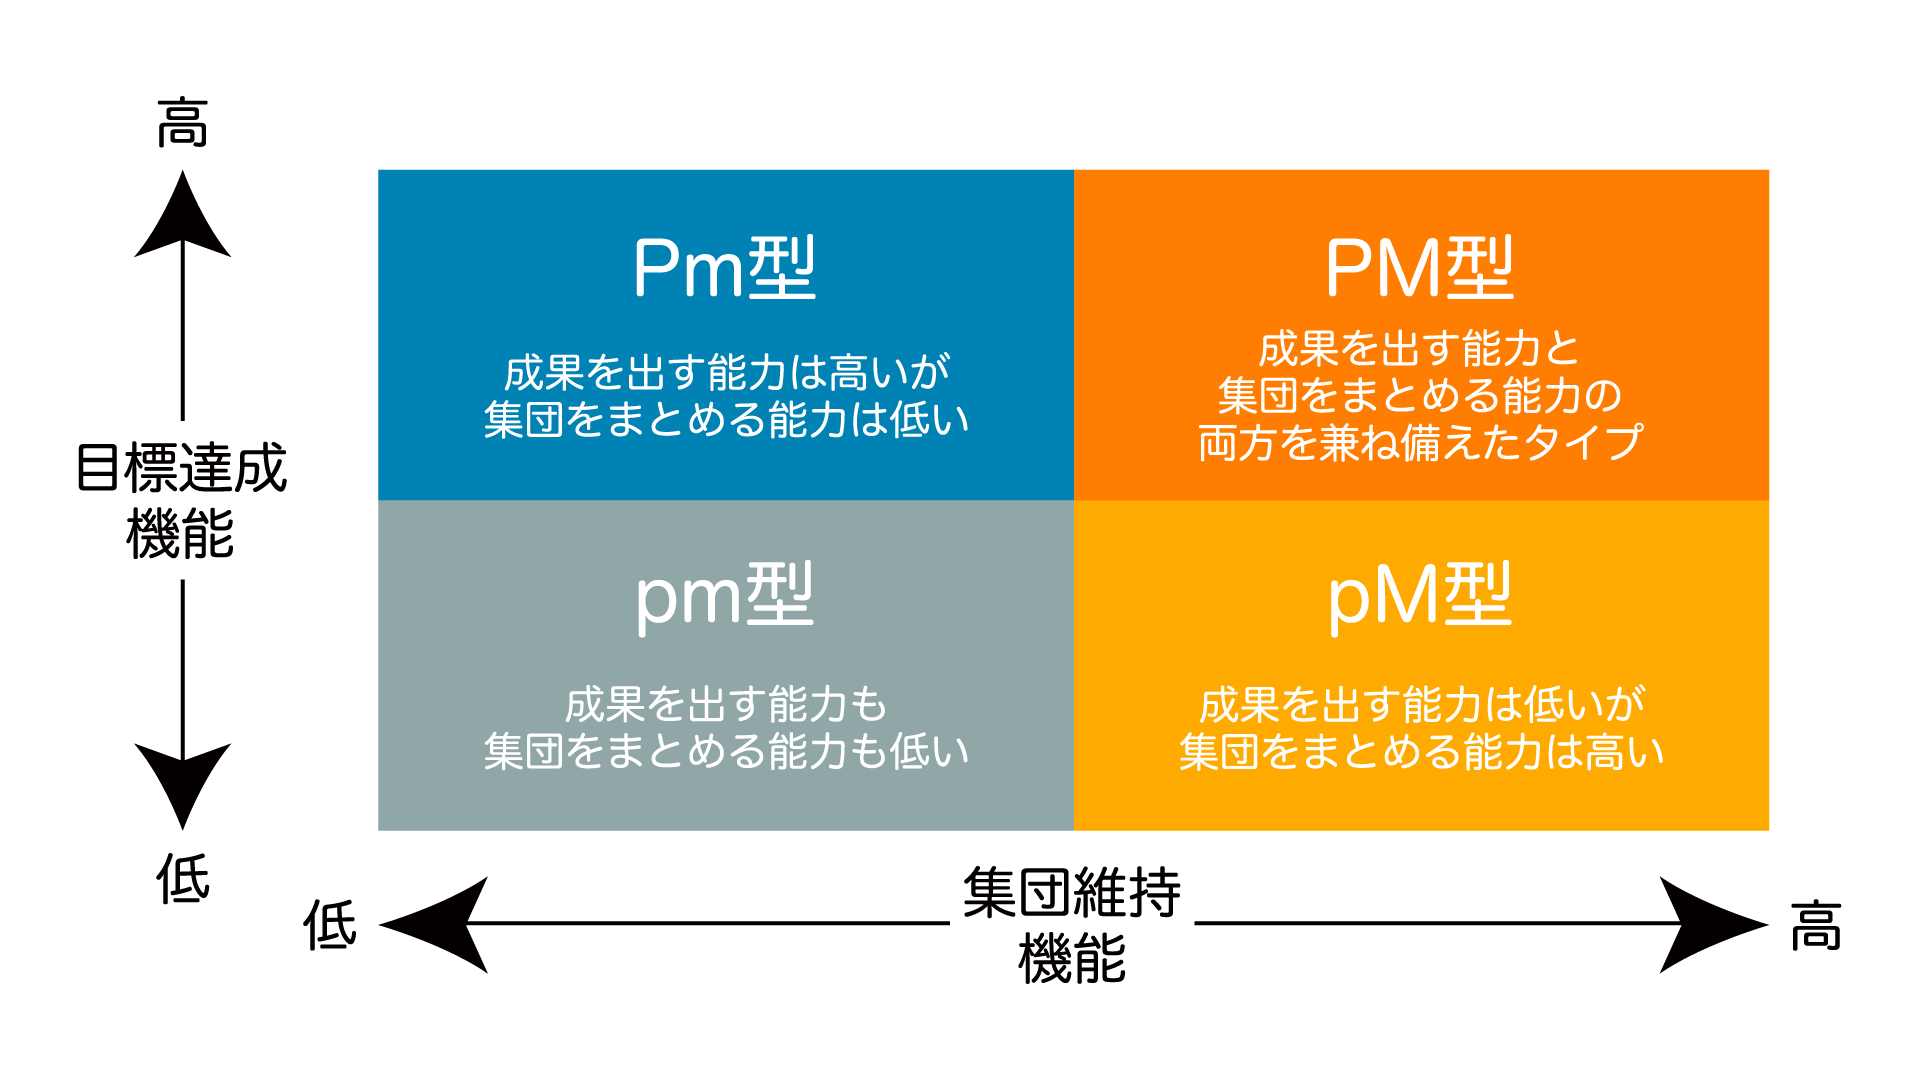 PM理論（カラー・png）